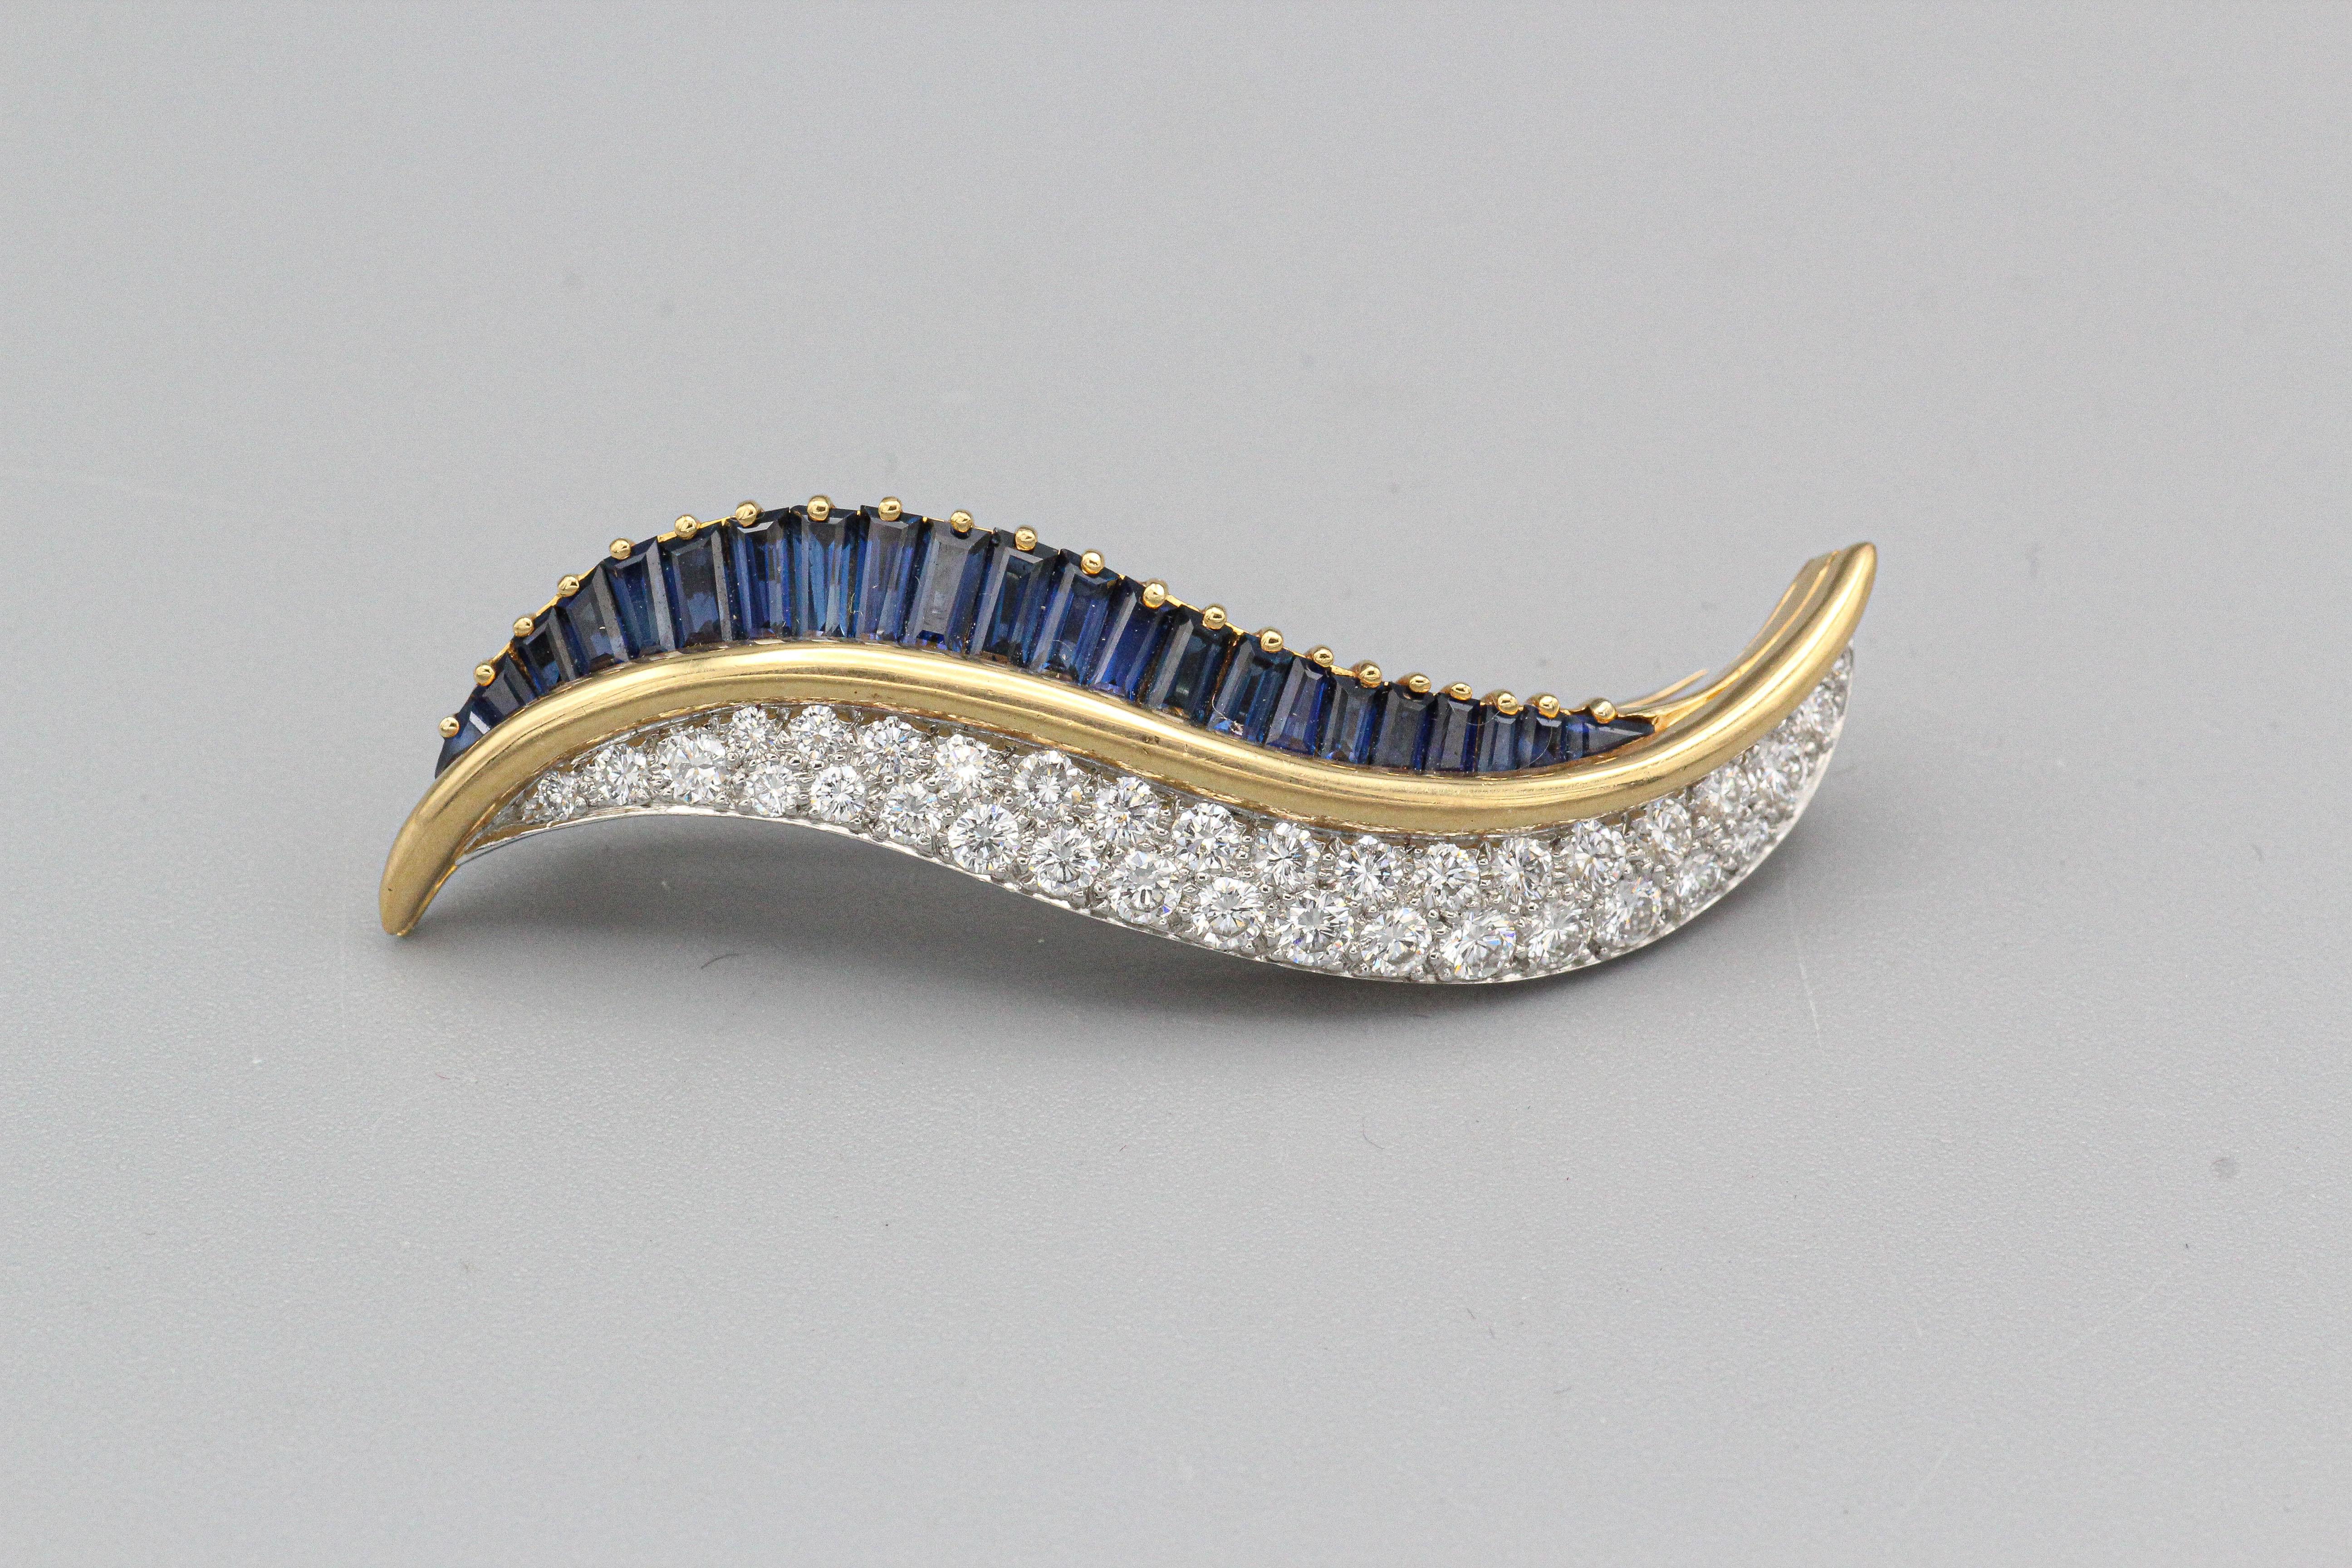 We would like to present this very fine diamond and sapphire brooch by Oscar Heyman & Bros., circa 1980s, for your consideration.

This brooch is a stunning piece of jewelry crafted with exquisite attention to detail. Made from 18k gold and